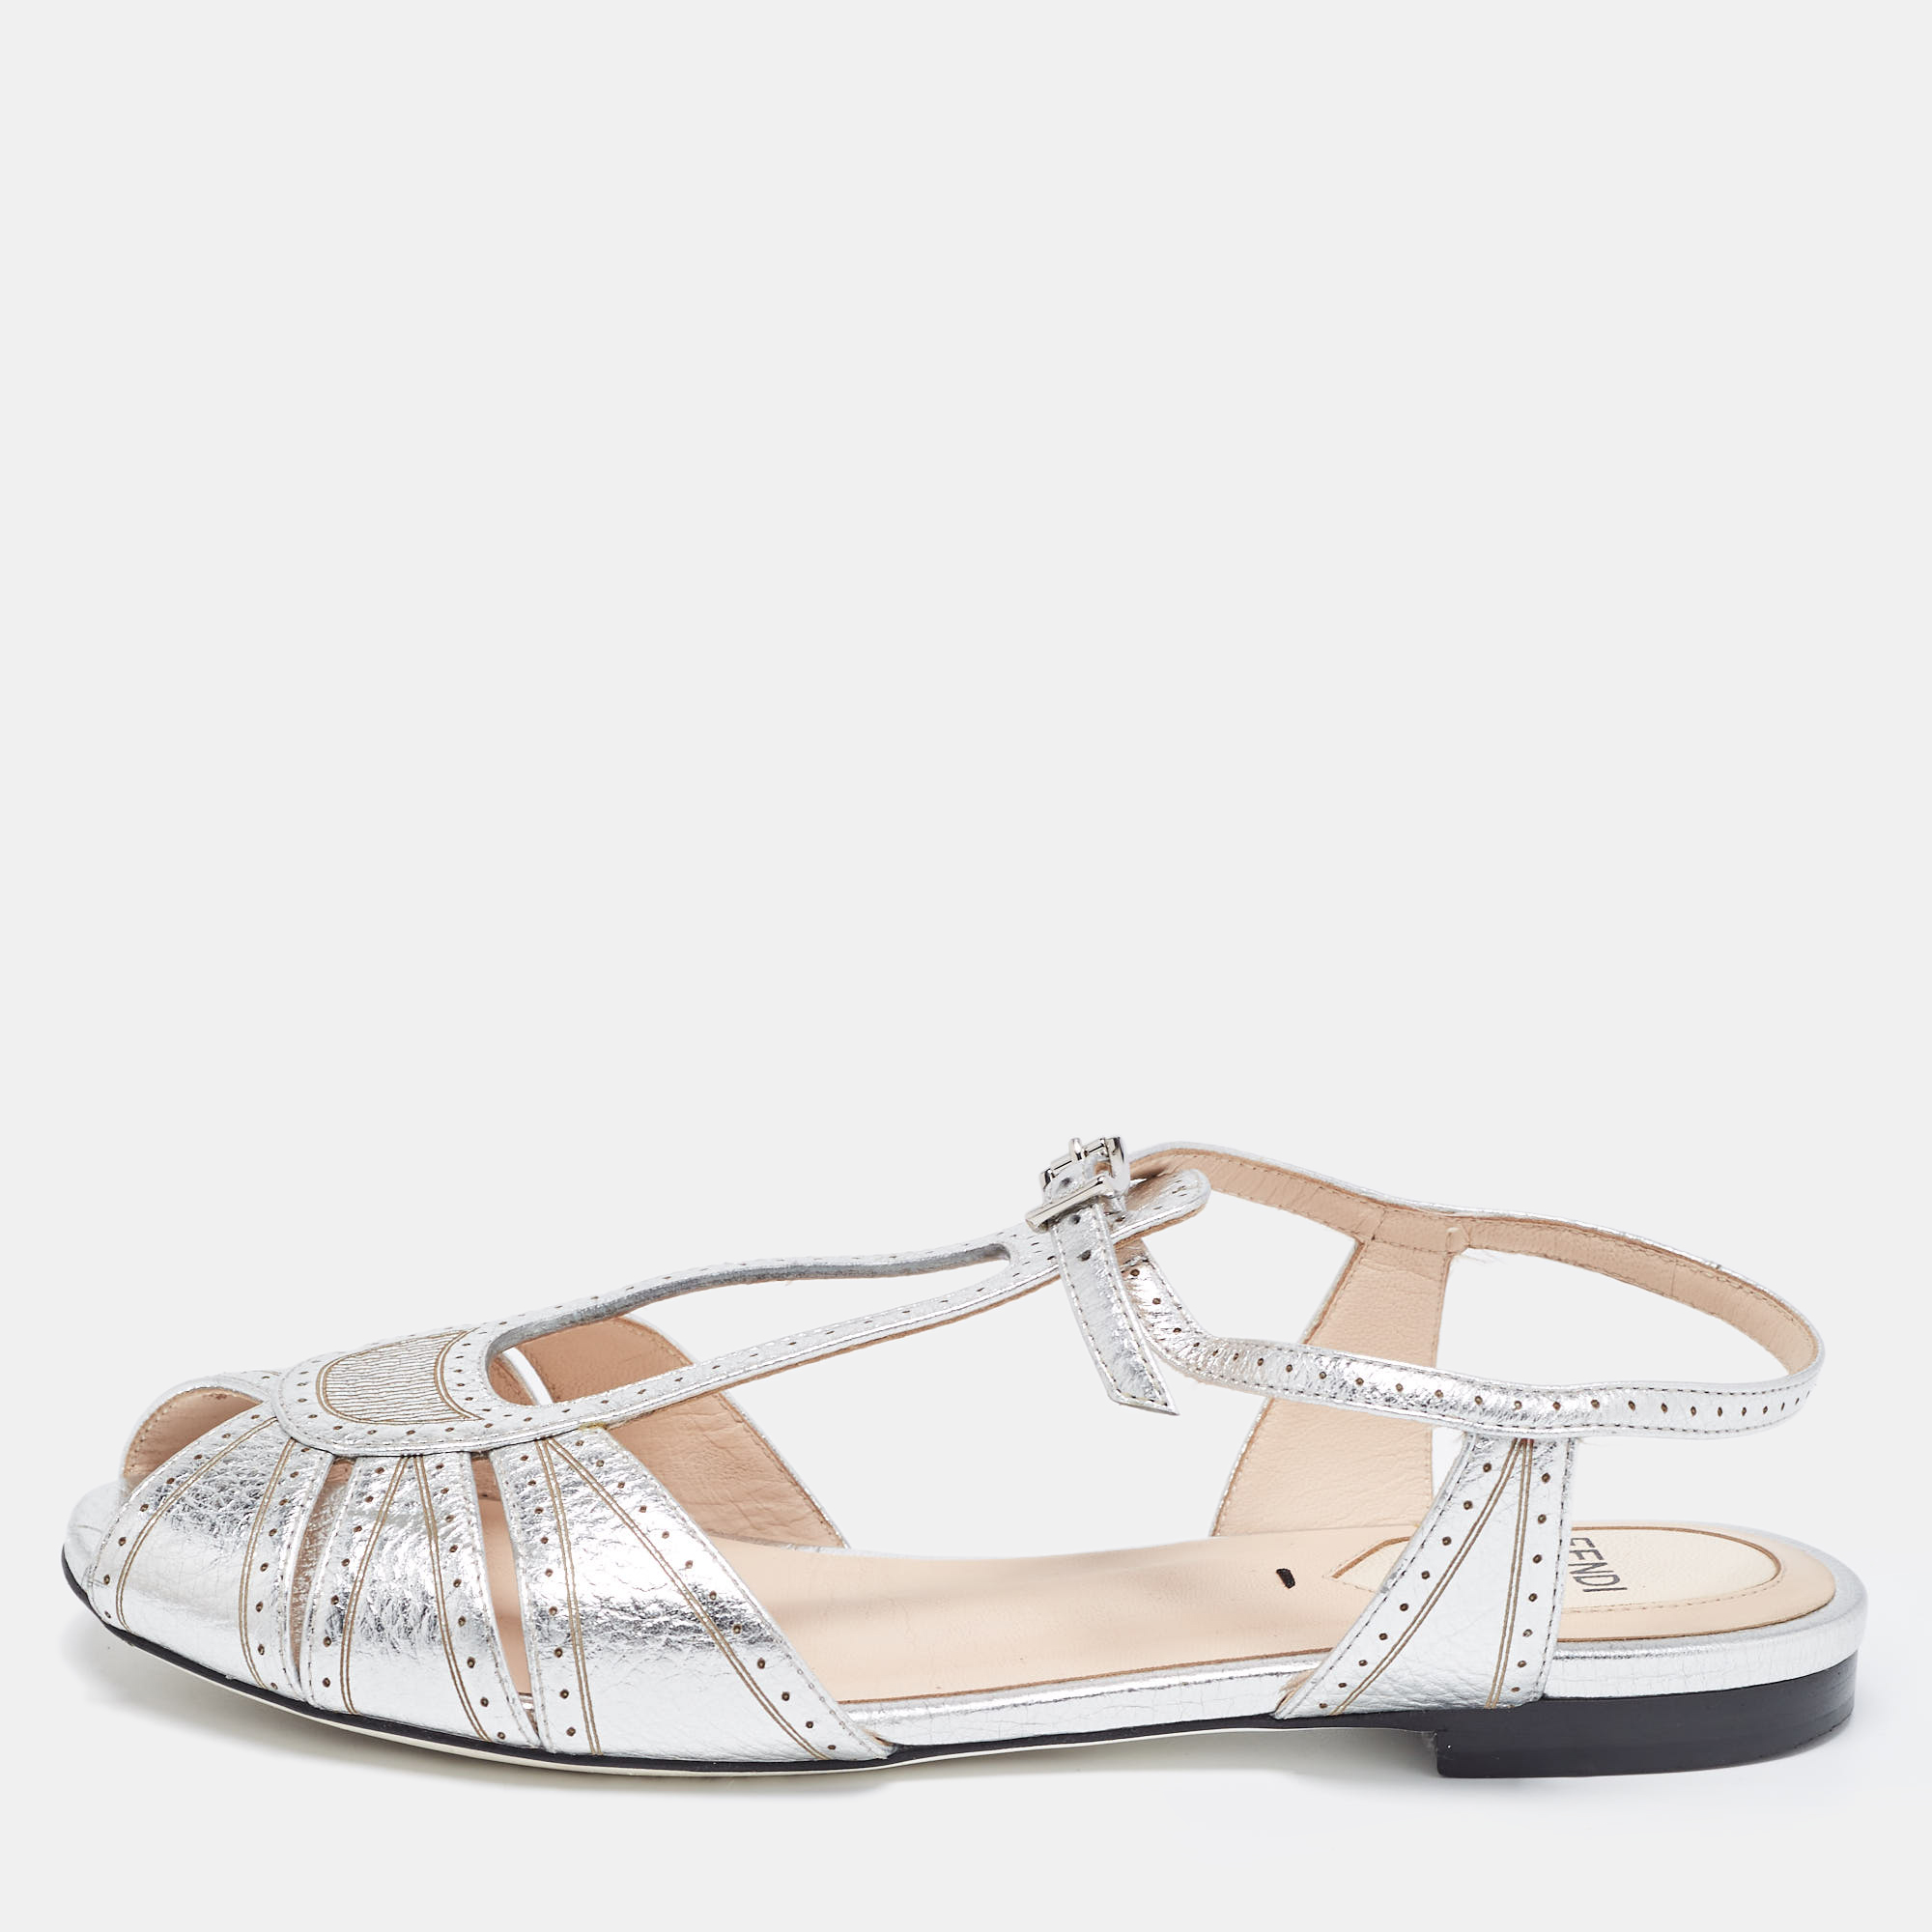 Pre-owned Fendi Metallic Silver Foil Leather Chameleon Ankle Strap Flat Sandals Size 36